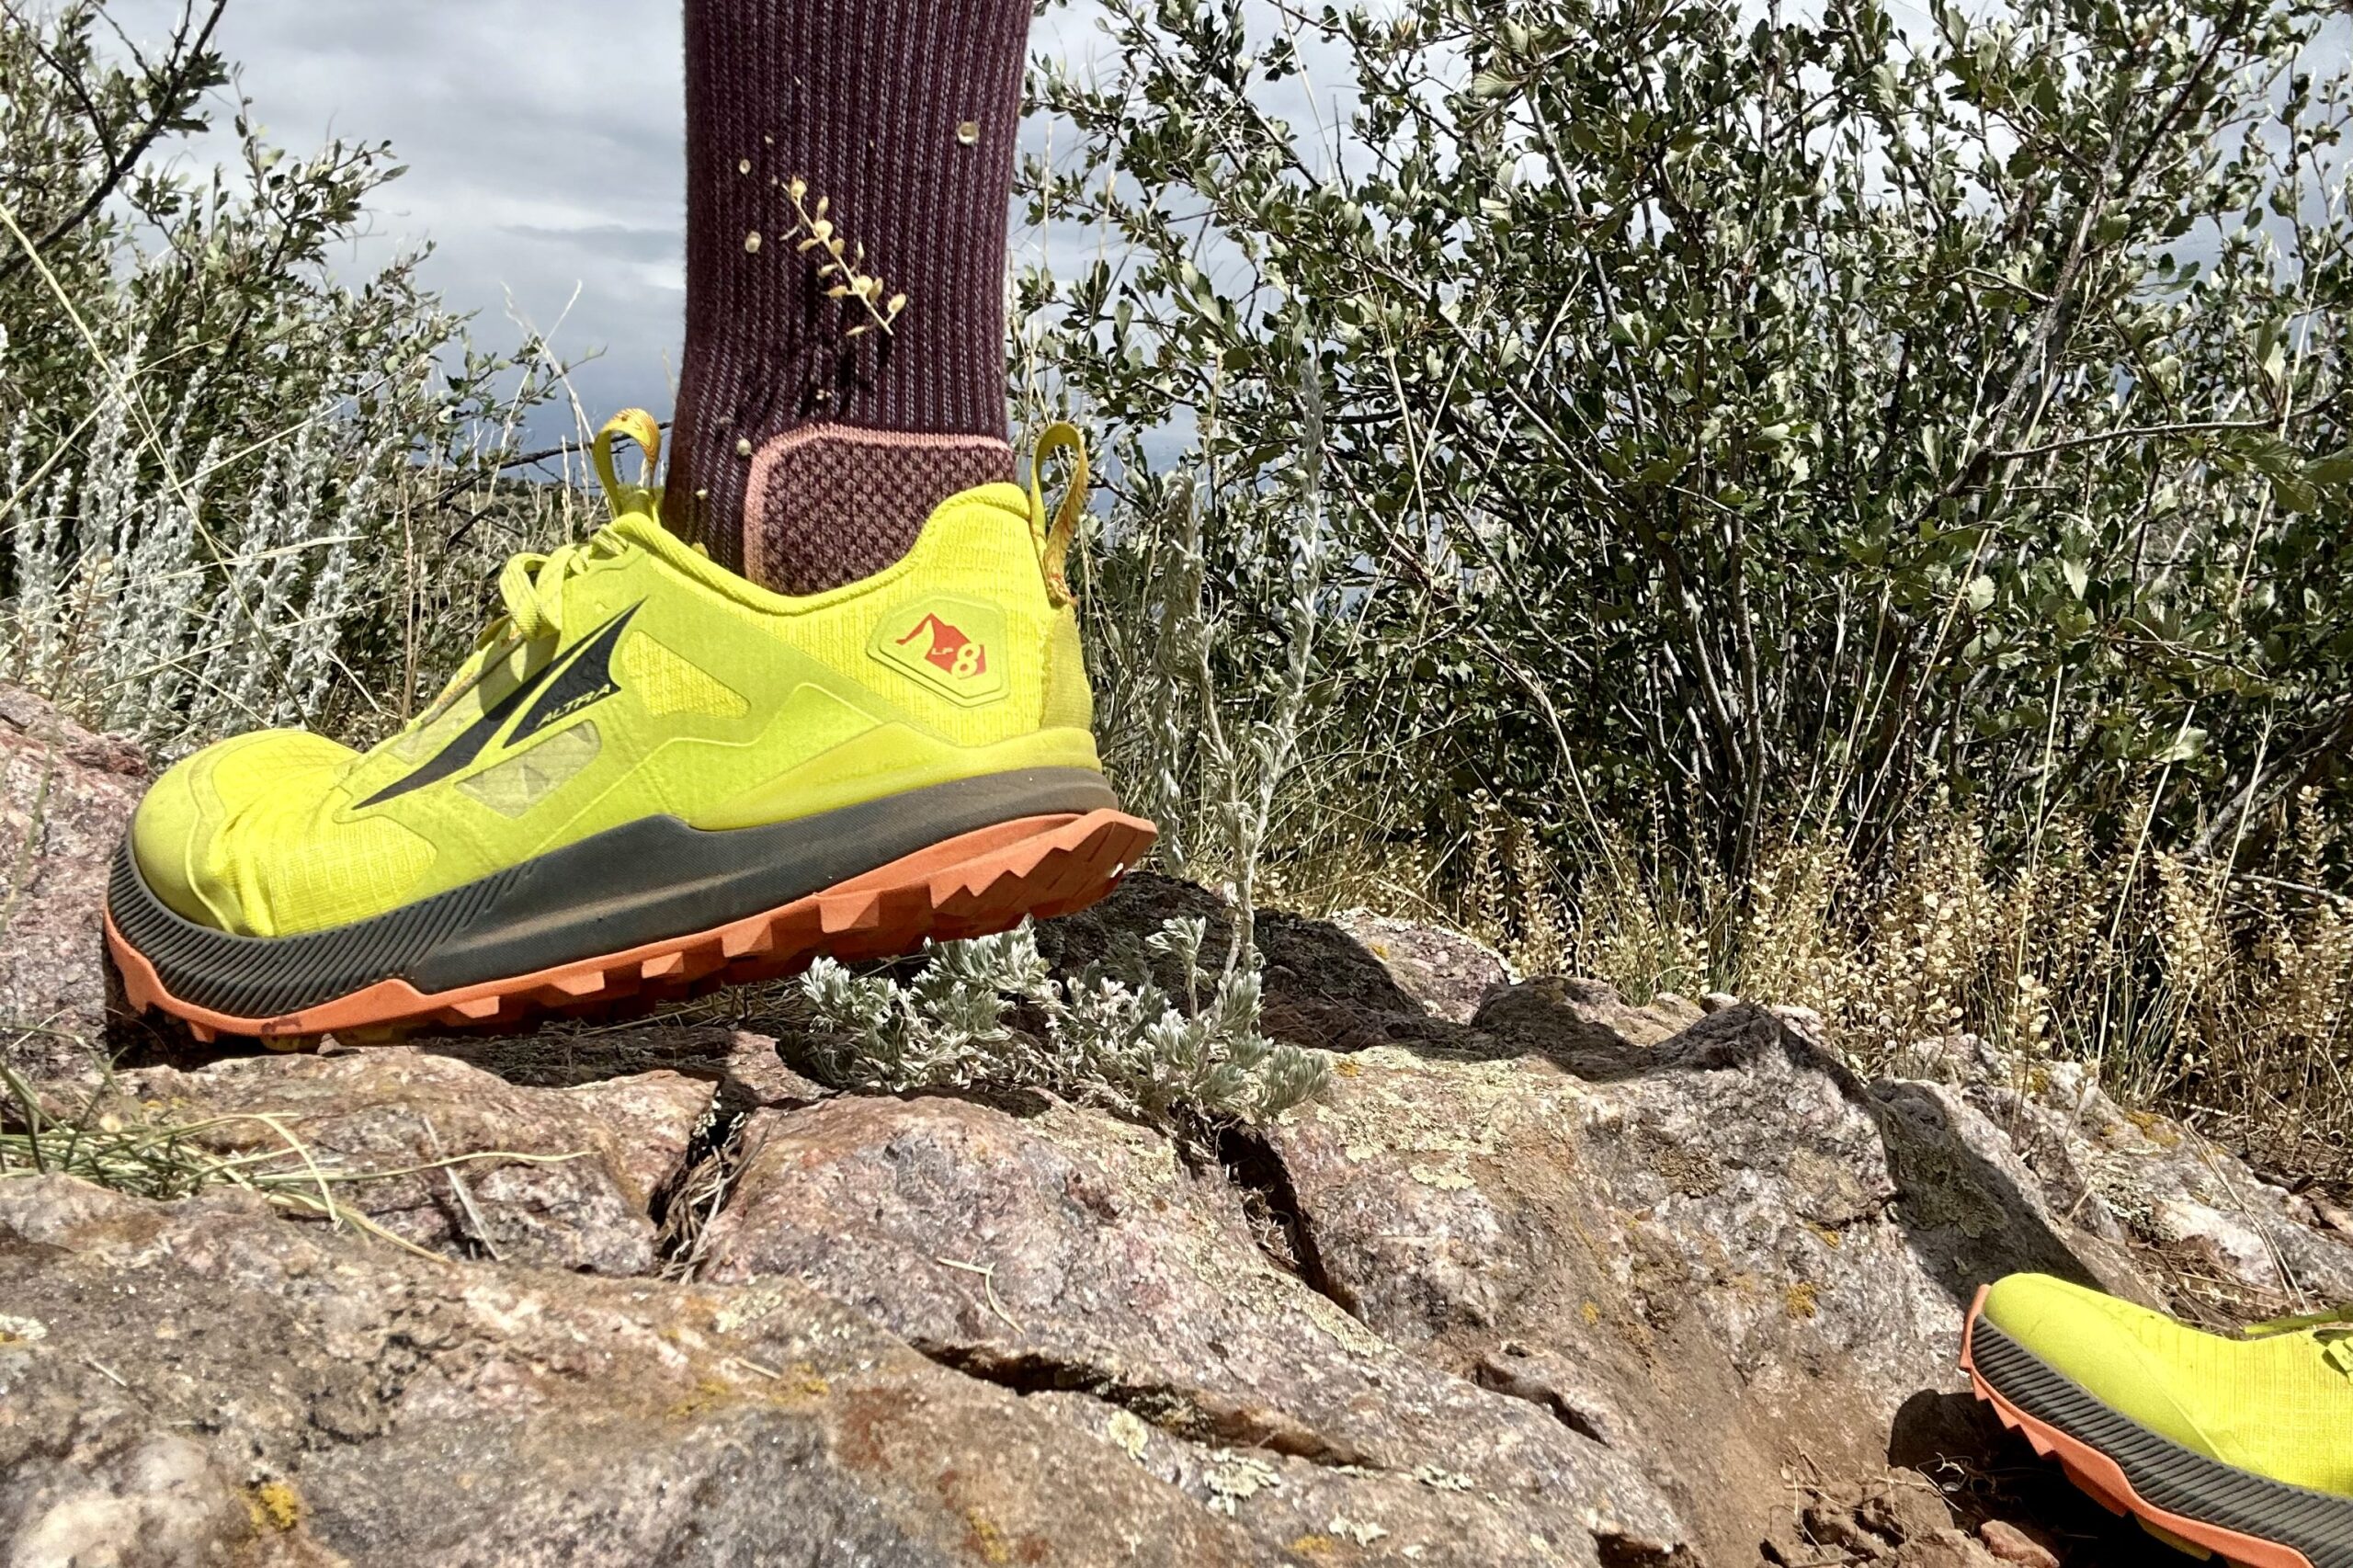 A close up of a hiker from the ankles down wearing trail runners in a desert setting.